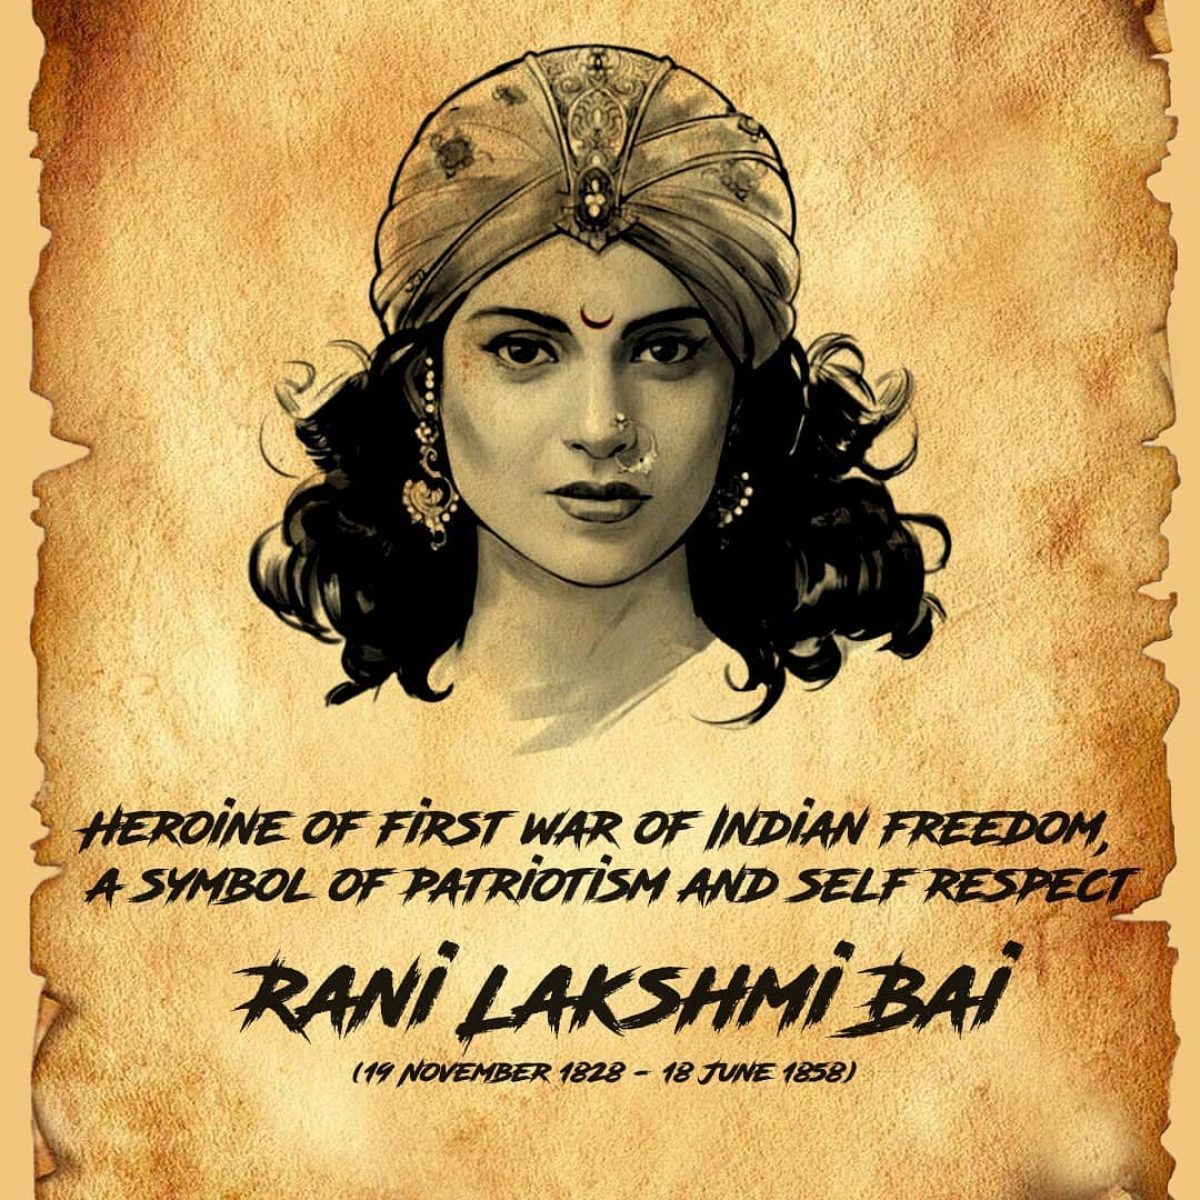 Rani Lakshmi Bai: Her Life Before She Became the Queen of Jhansi